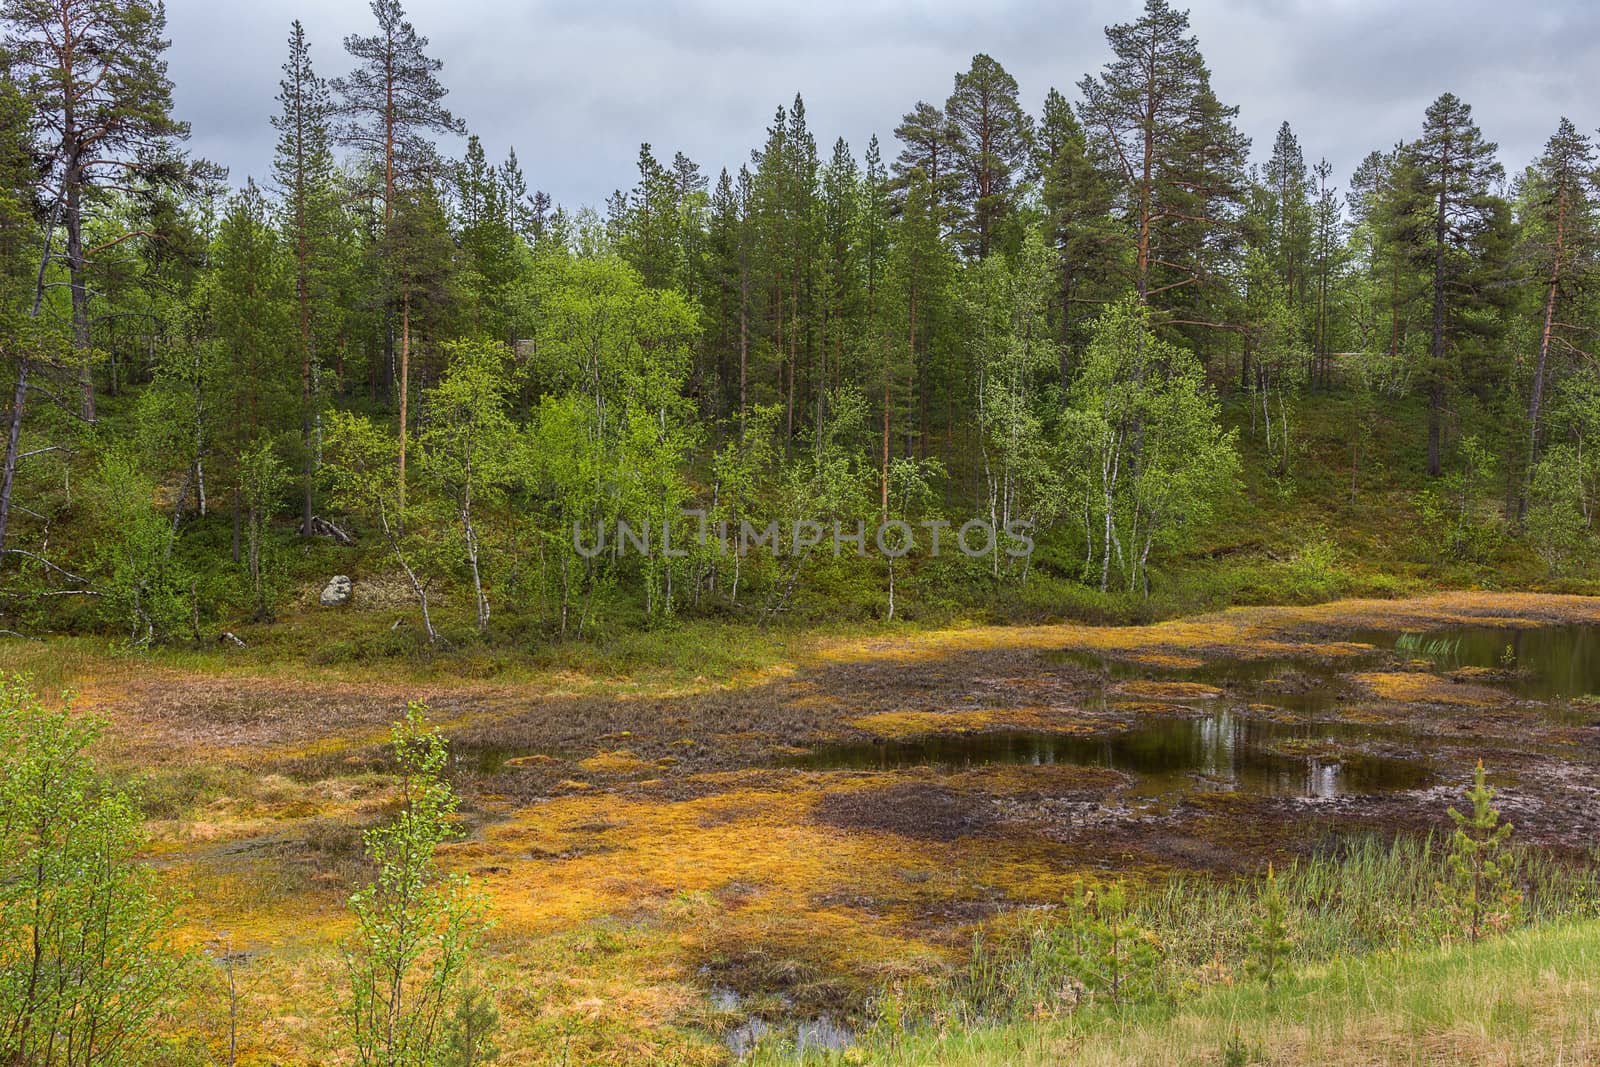 Marshland adds some golden colors in an otherwise green environment.